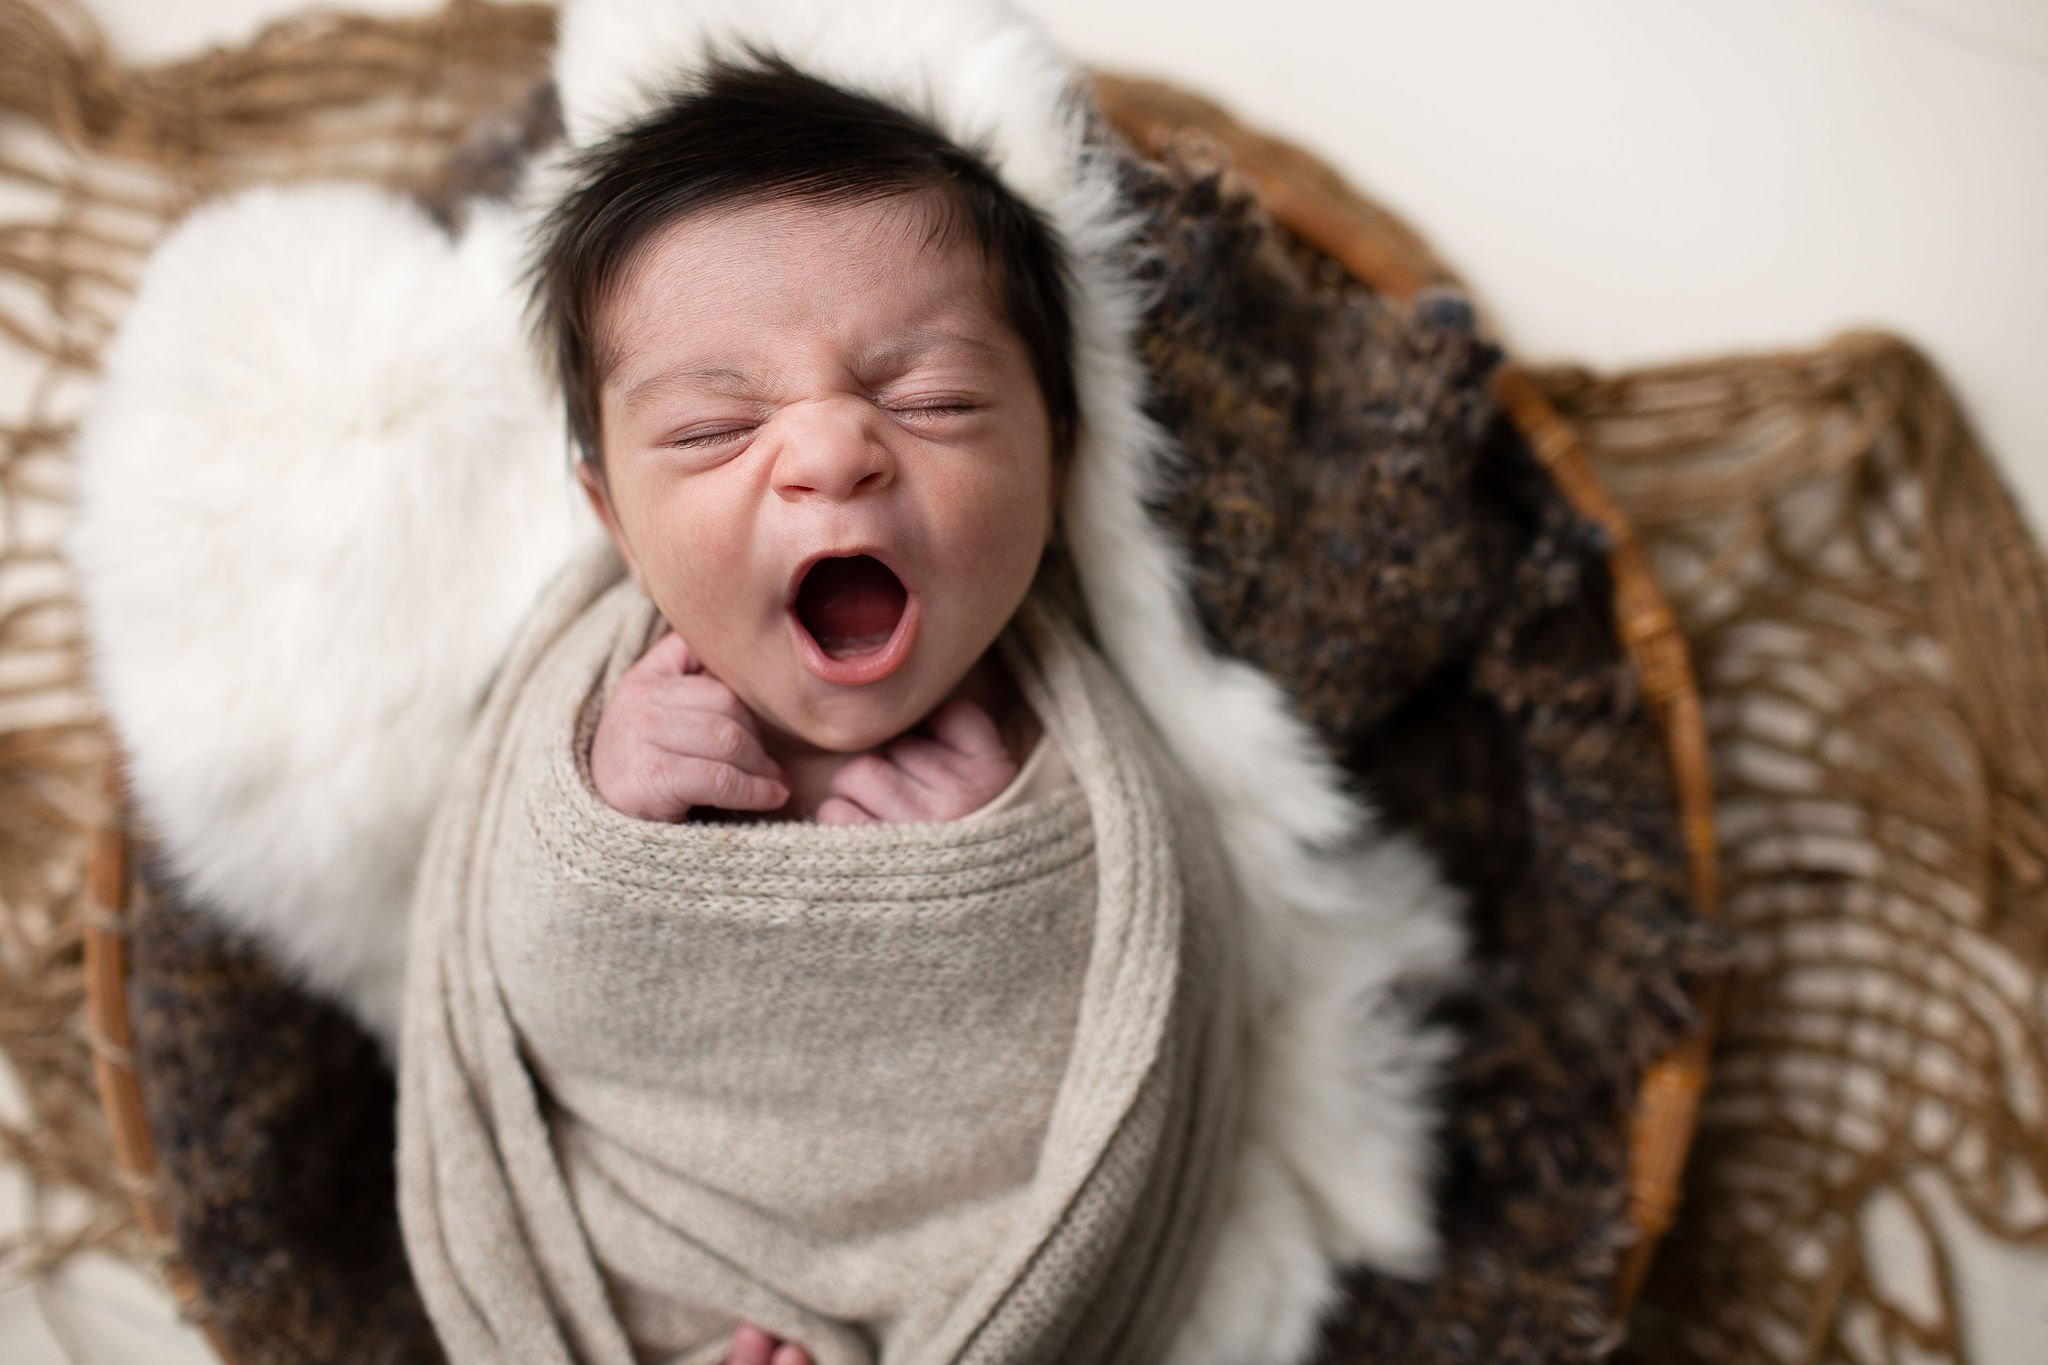  a big yawn by a newborn baby who is wrapped in a blanket 